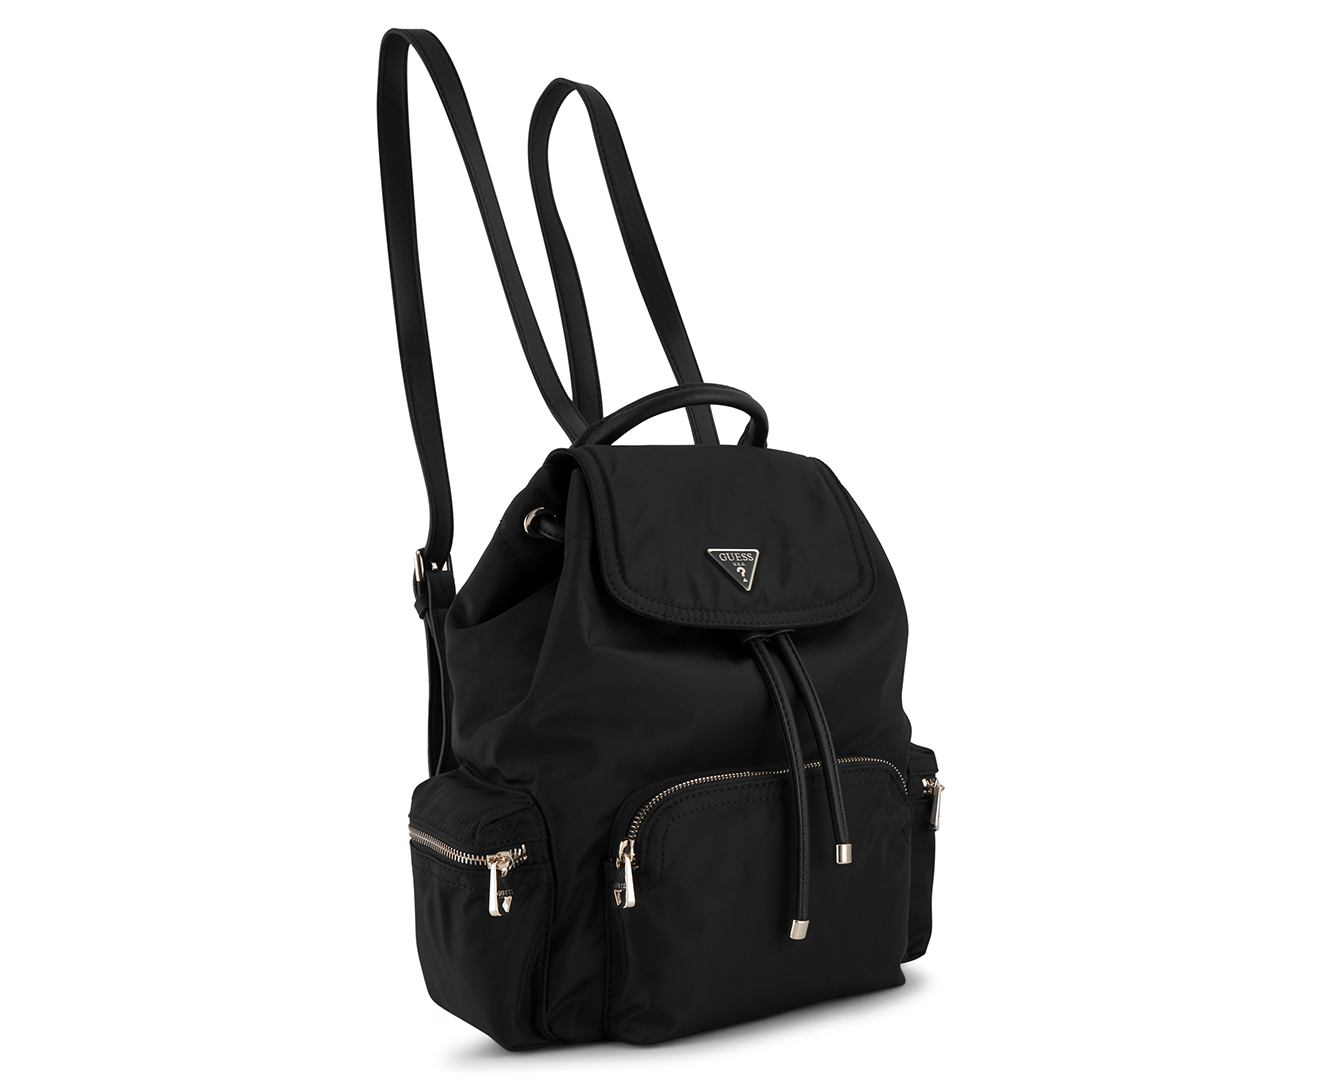 GUESS Eco Gemma Backpack - Black | Catch.co.nz